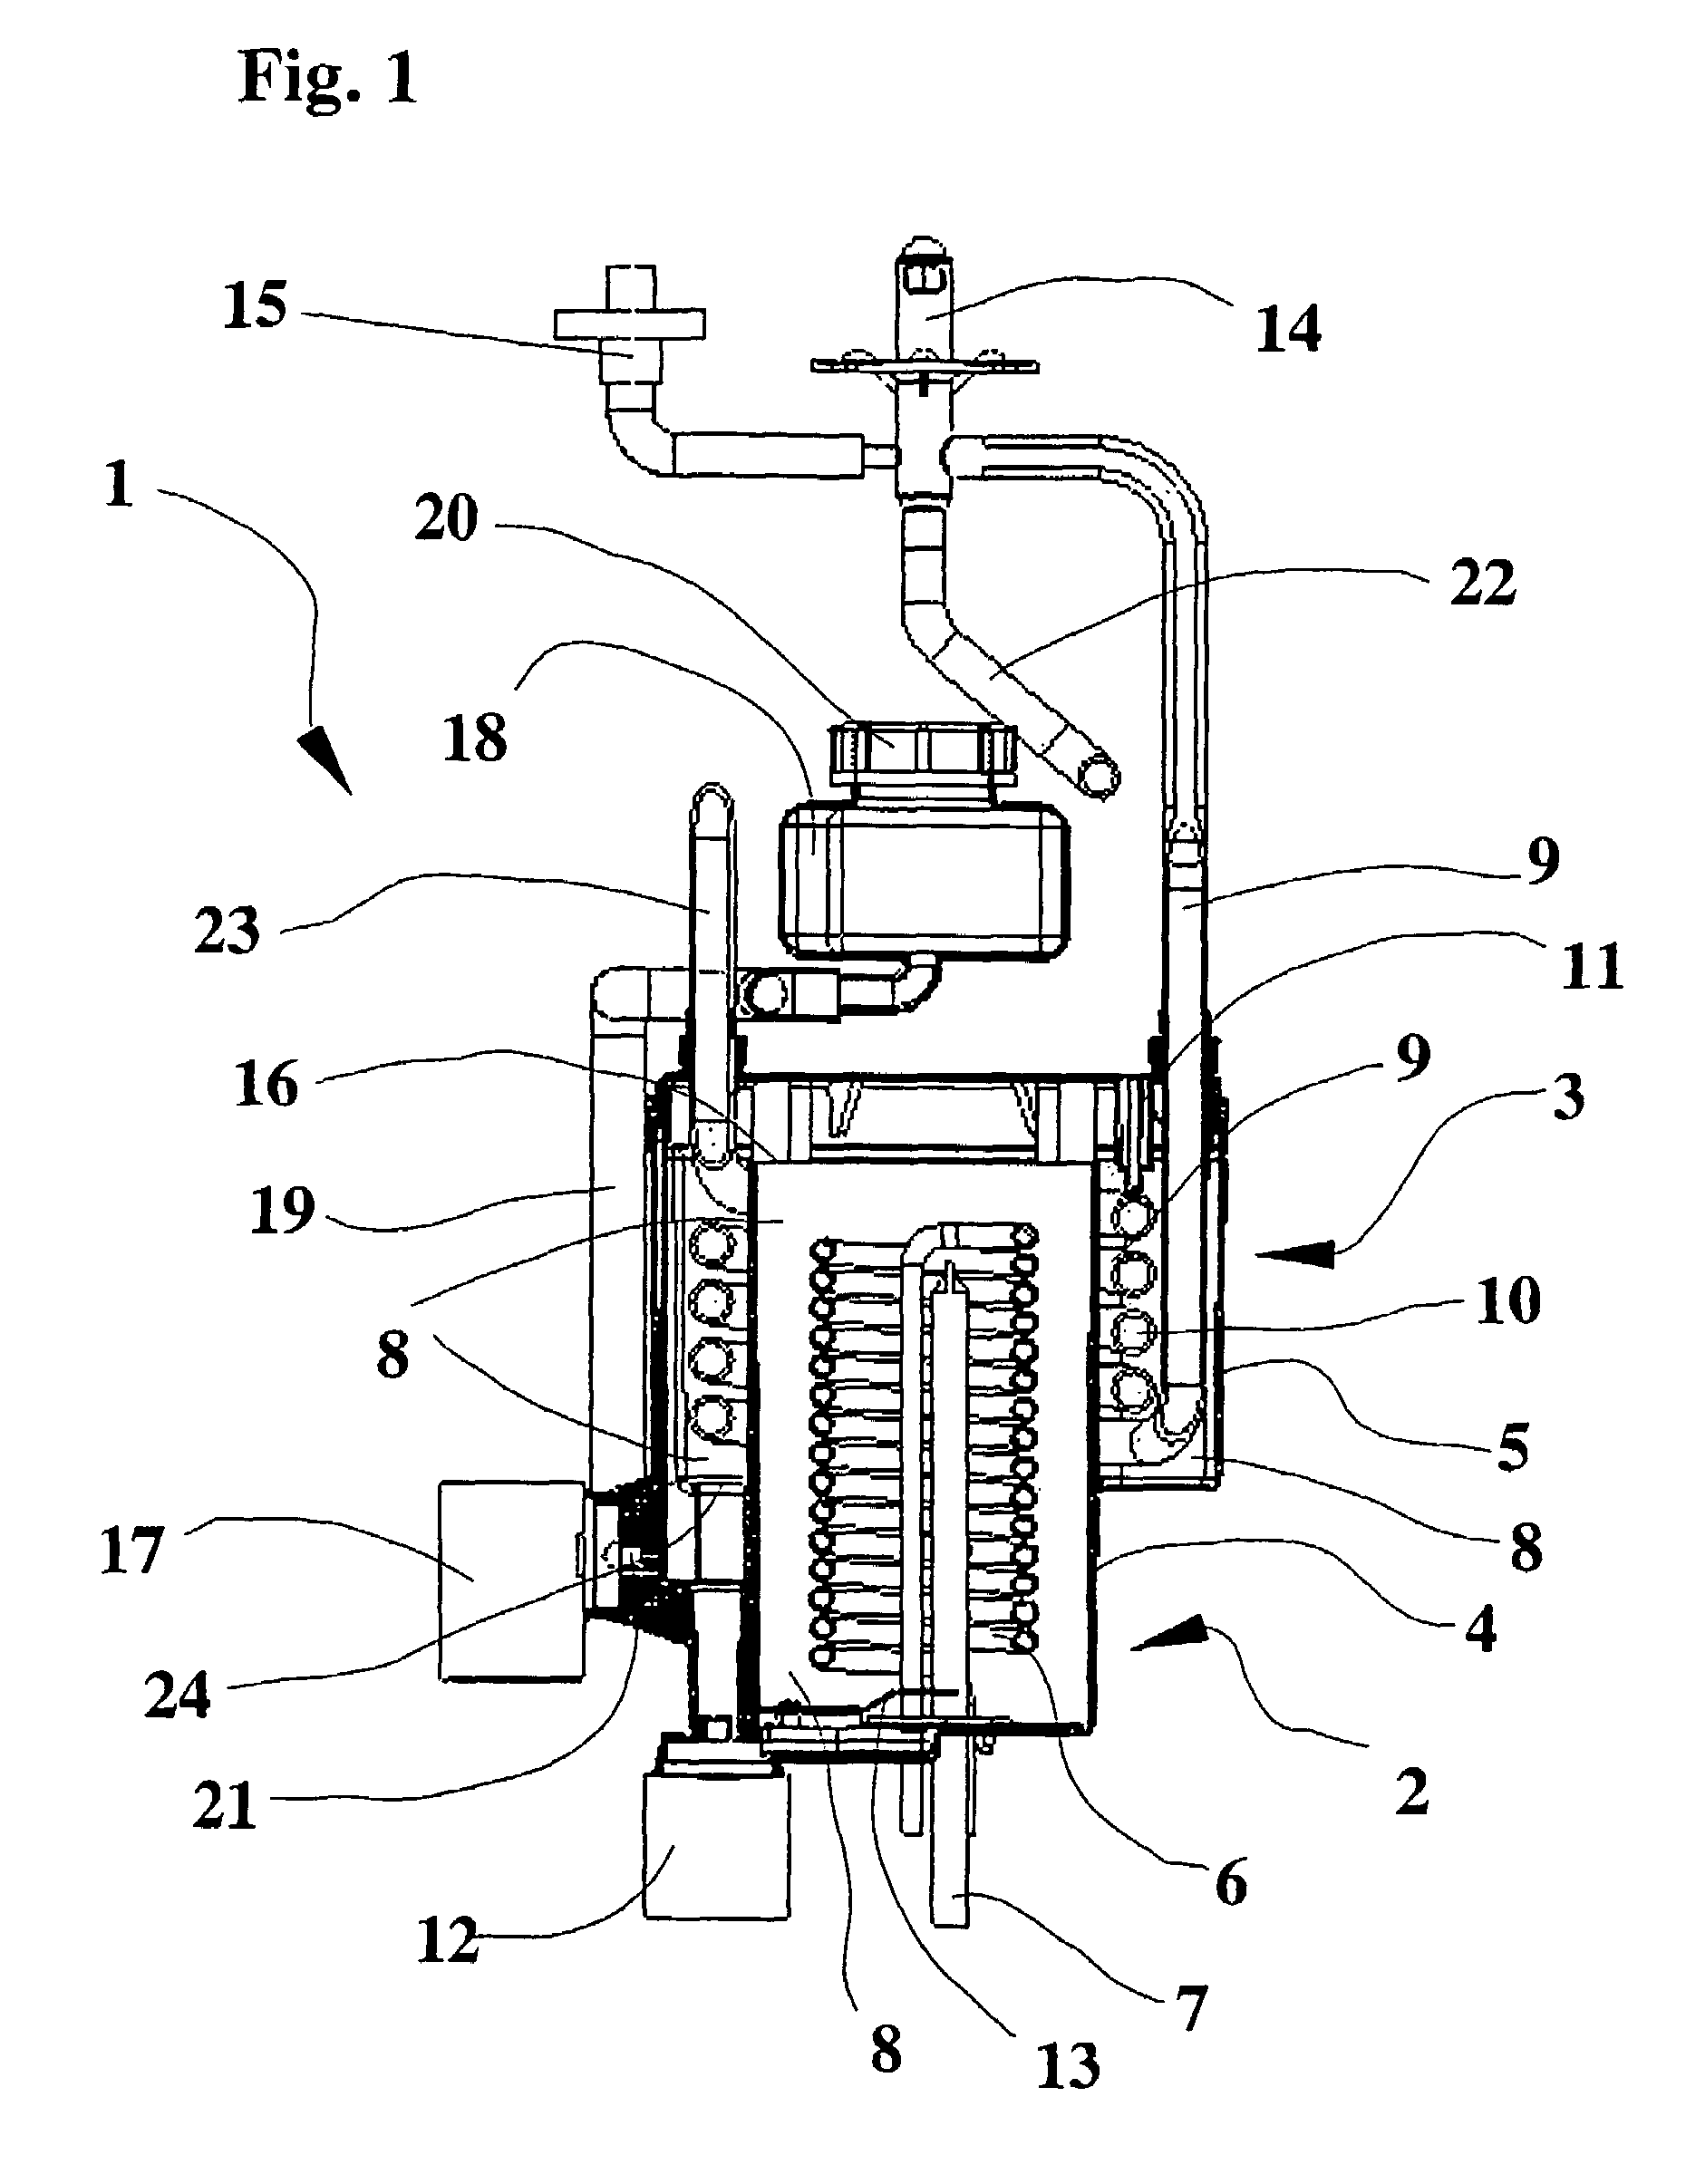 Fluid cooling system, cooled fluid dispenser comprising the later, and methods for sterilization thereof